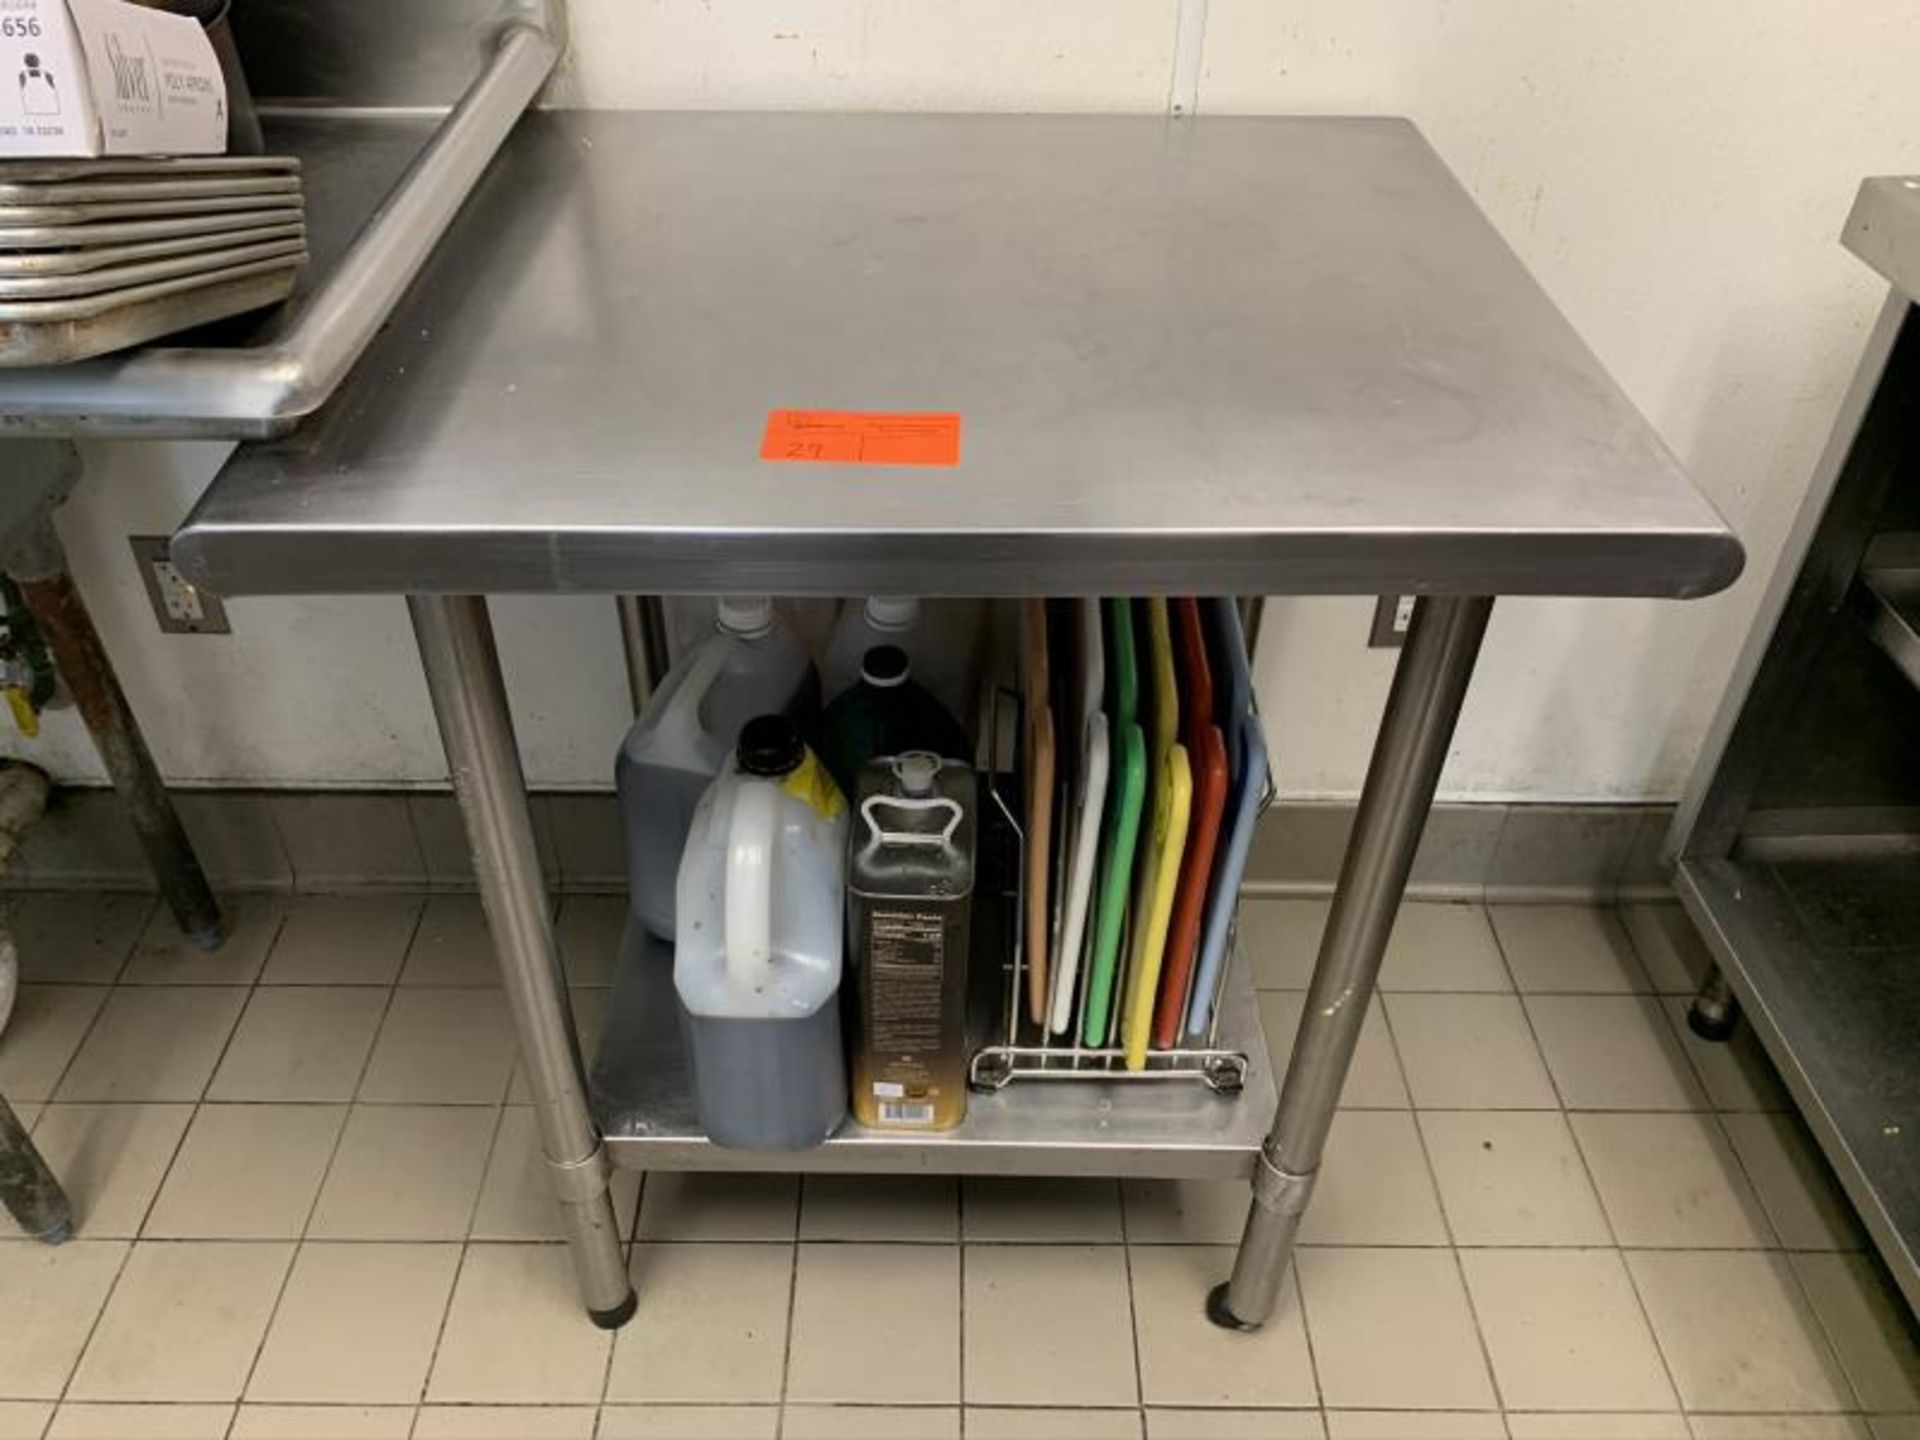 Stainless Stell prep table with lower stainless steel shlef 30"x24"